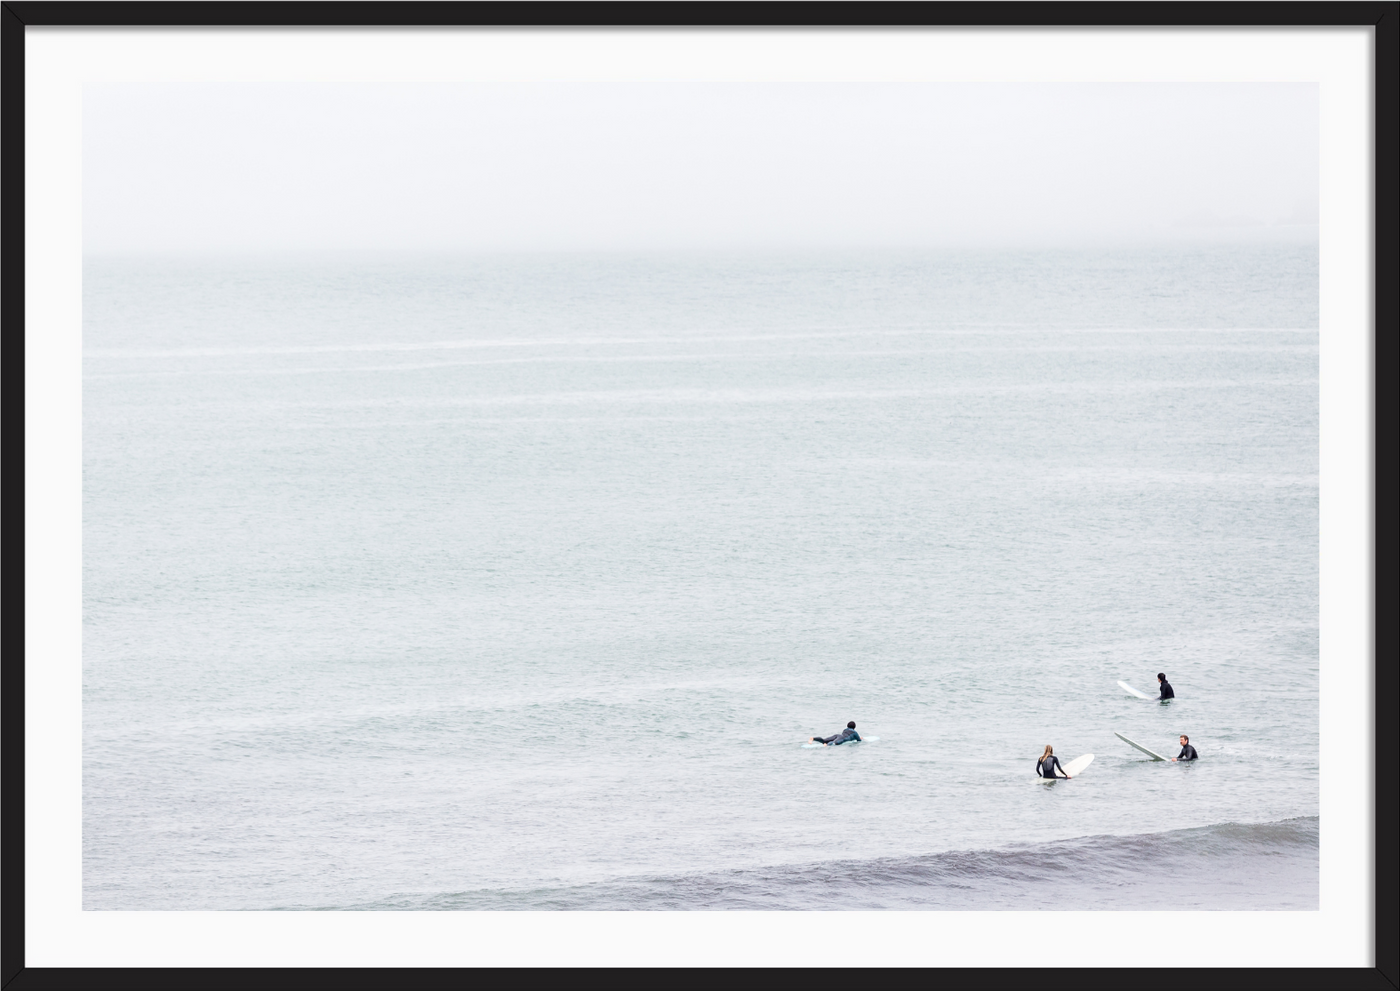 Pacifica Surfers Waiting For a Wave